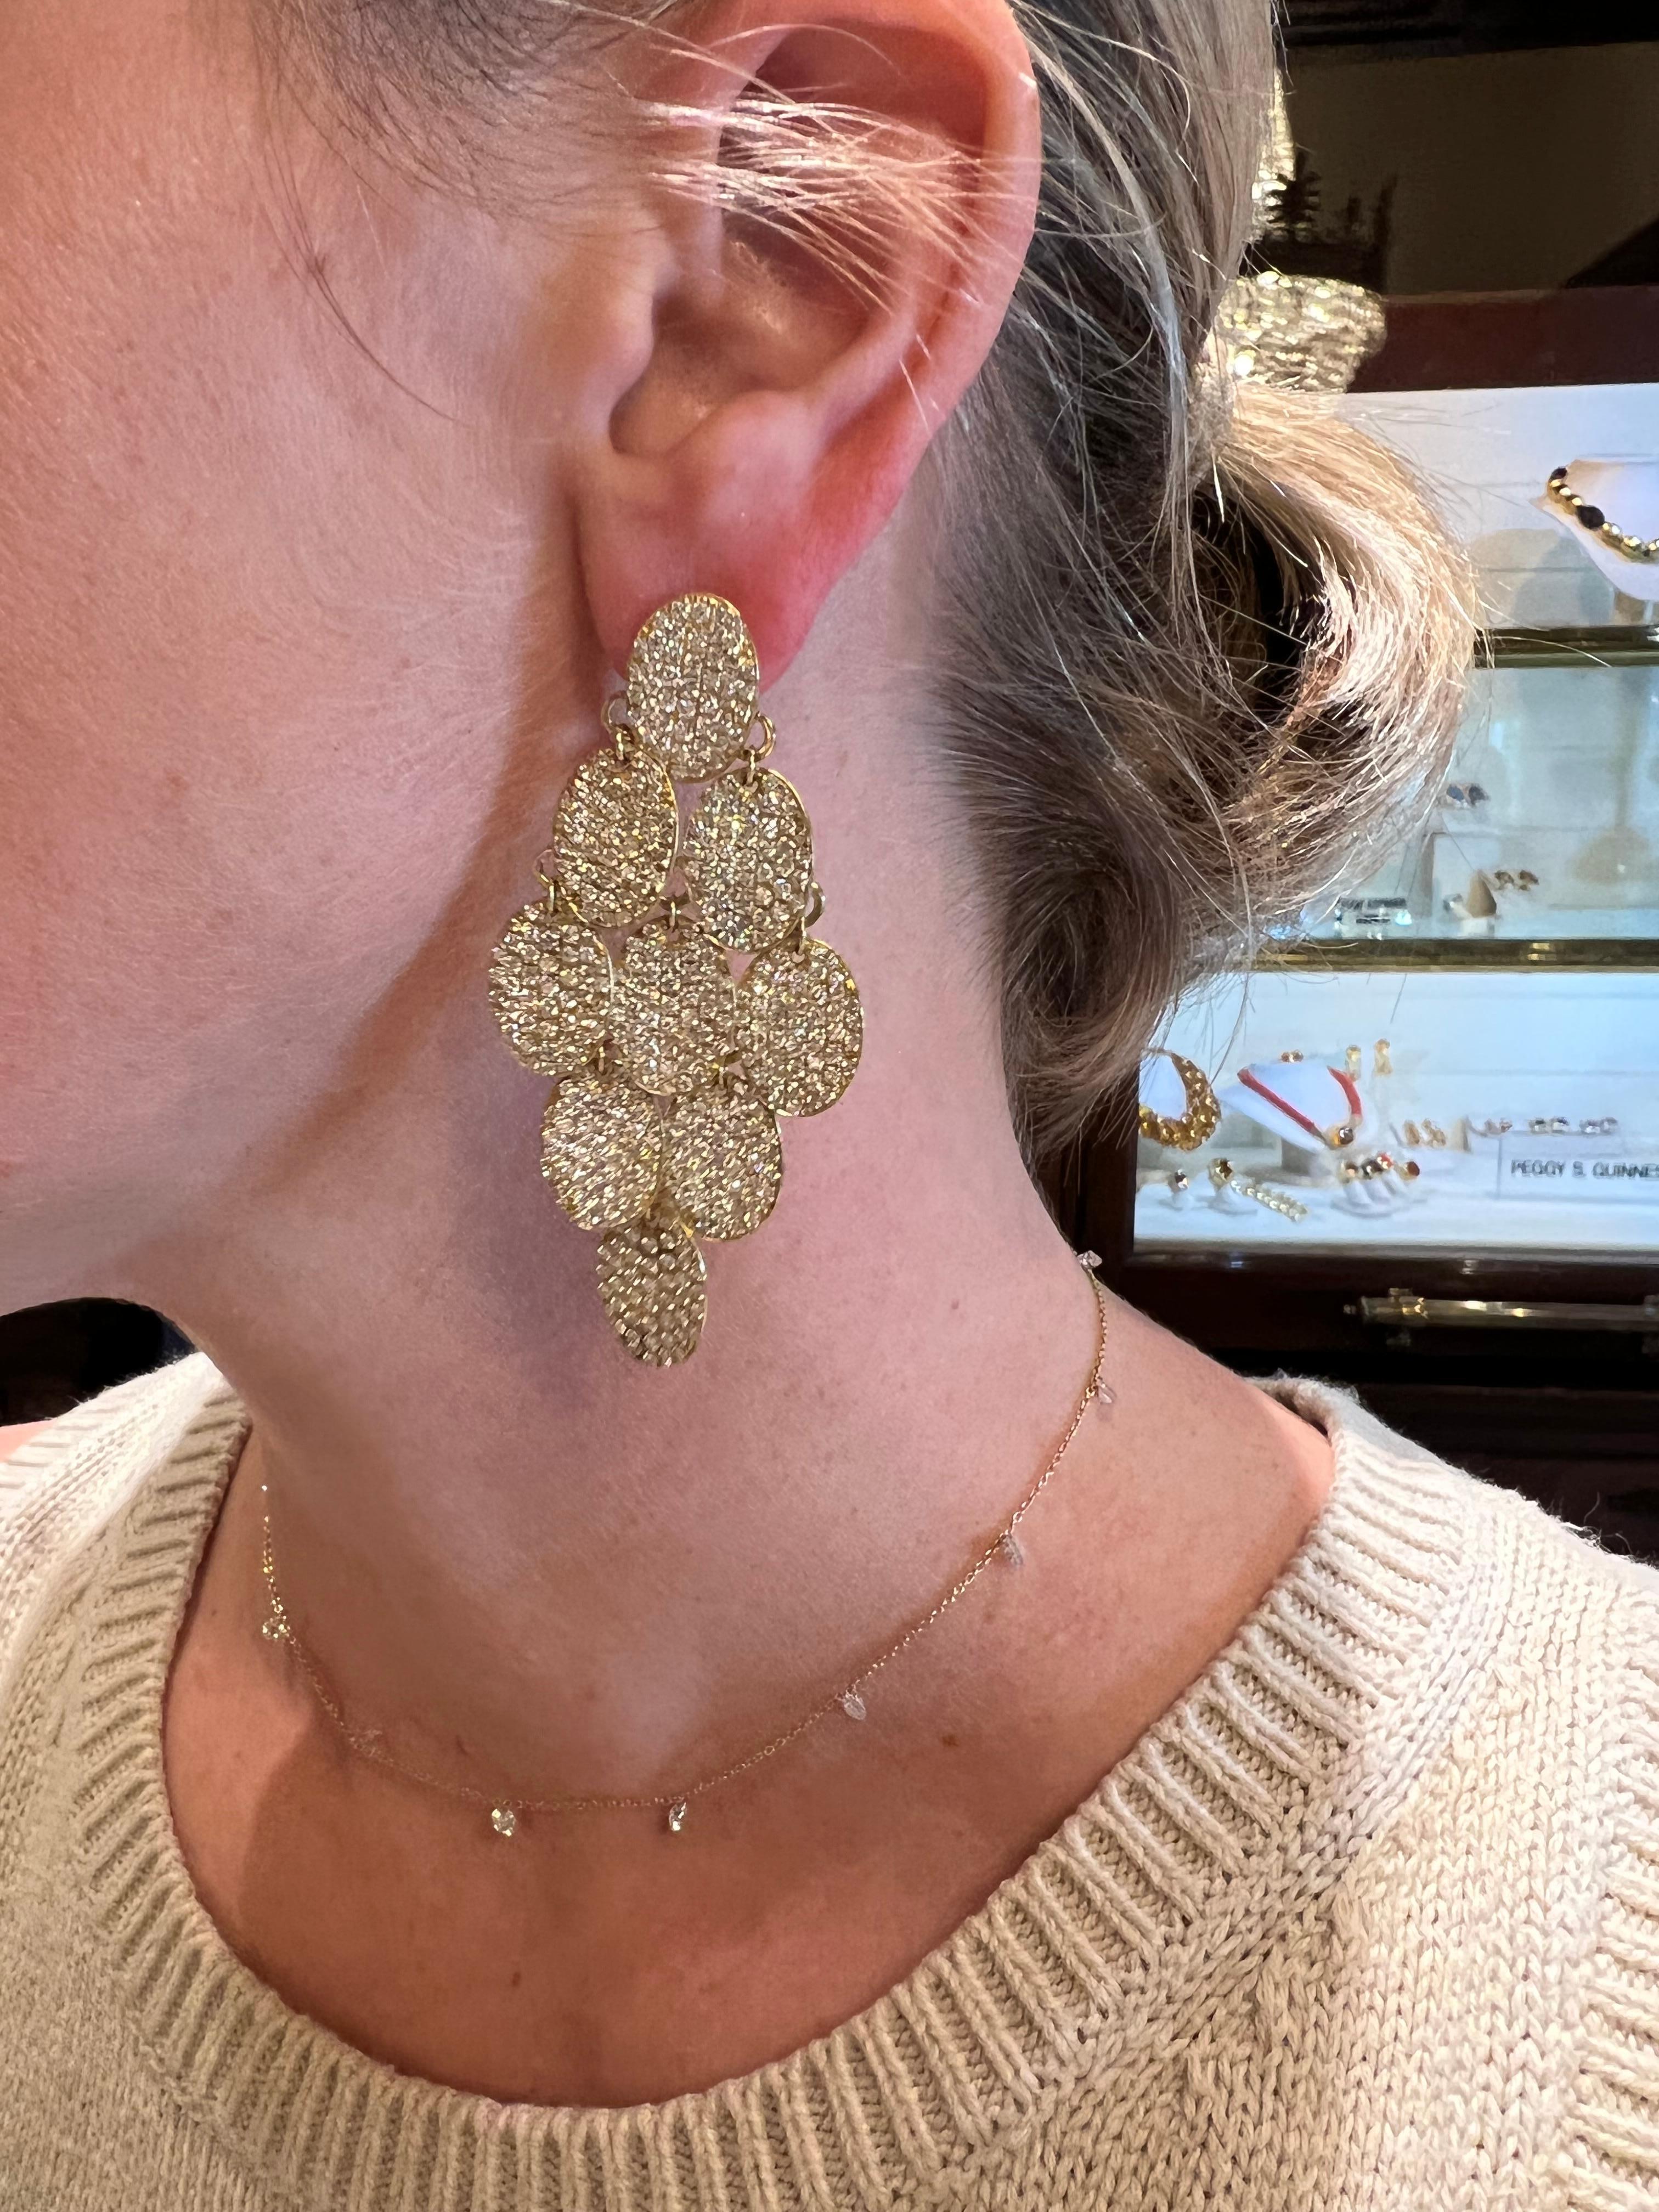 Estate Ippolita 'Cascade' long chandelier drop earrings, each featuring nine pavé diamond-set oval-shaped discs in 18k yellow gold. 846 diamonds weighing ~9.75 total carats, Omega clip backs with posts. Signed 